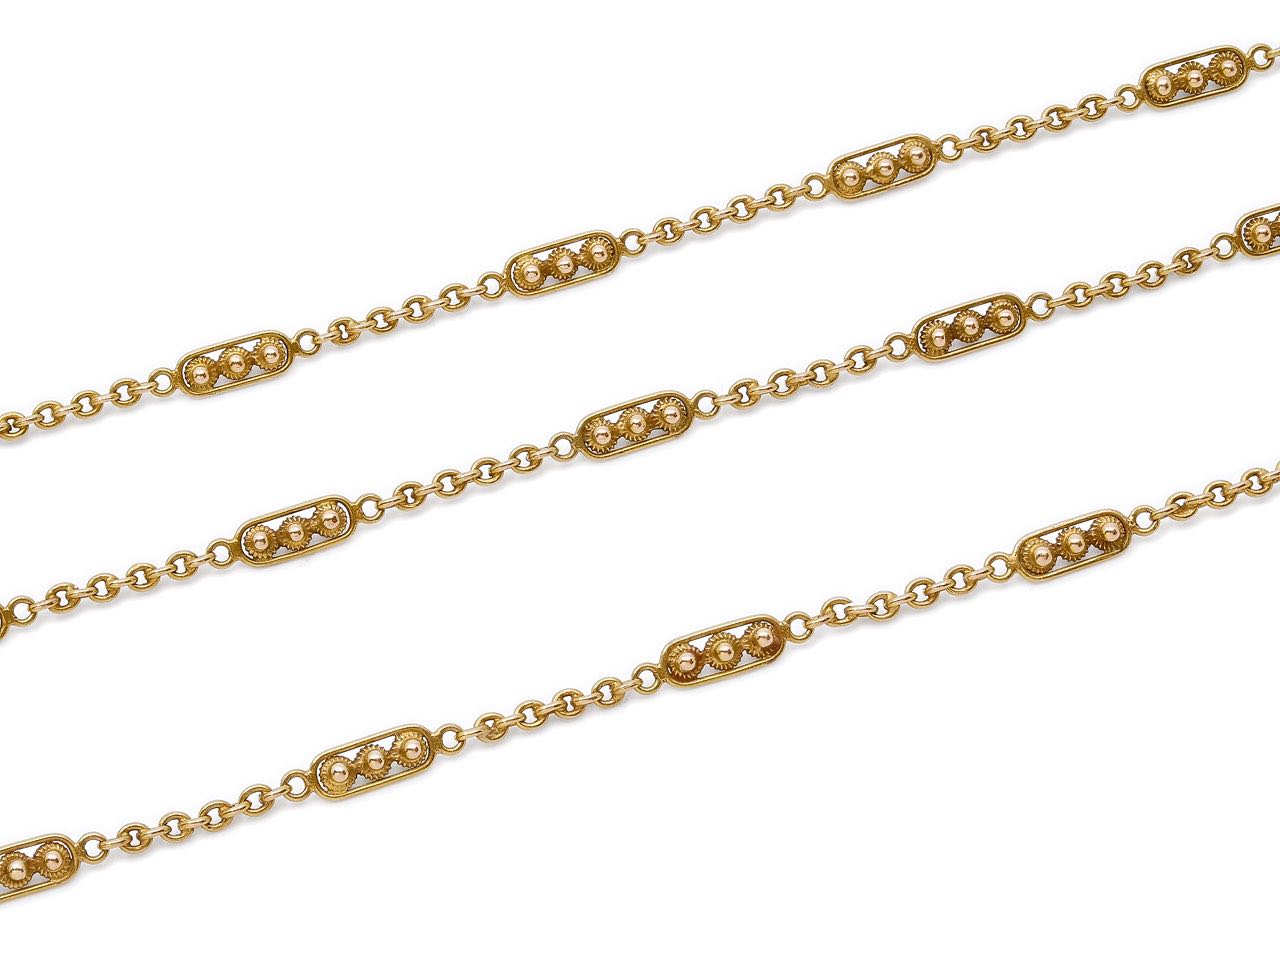 Antique Victorian Long Gold Chain, 55 Inches, in 14K Gold